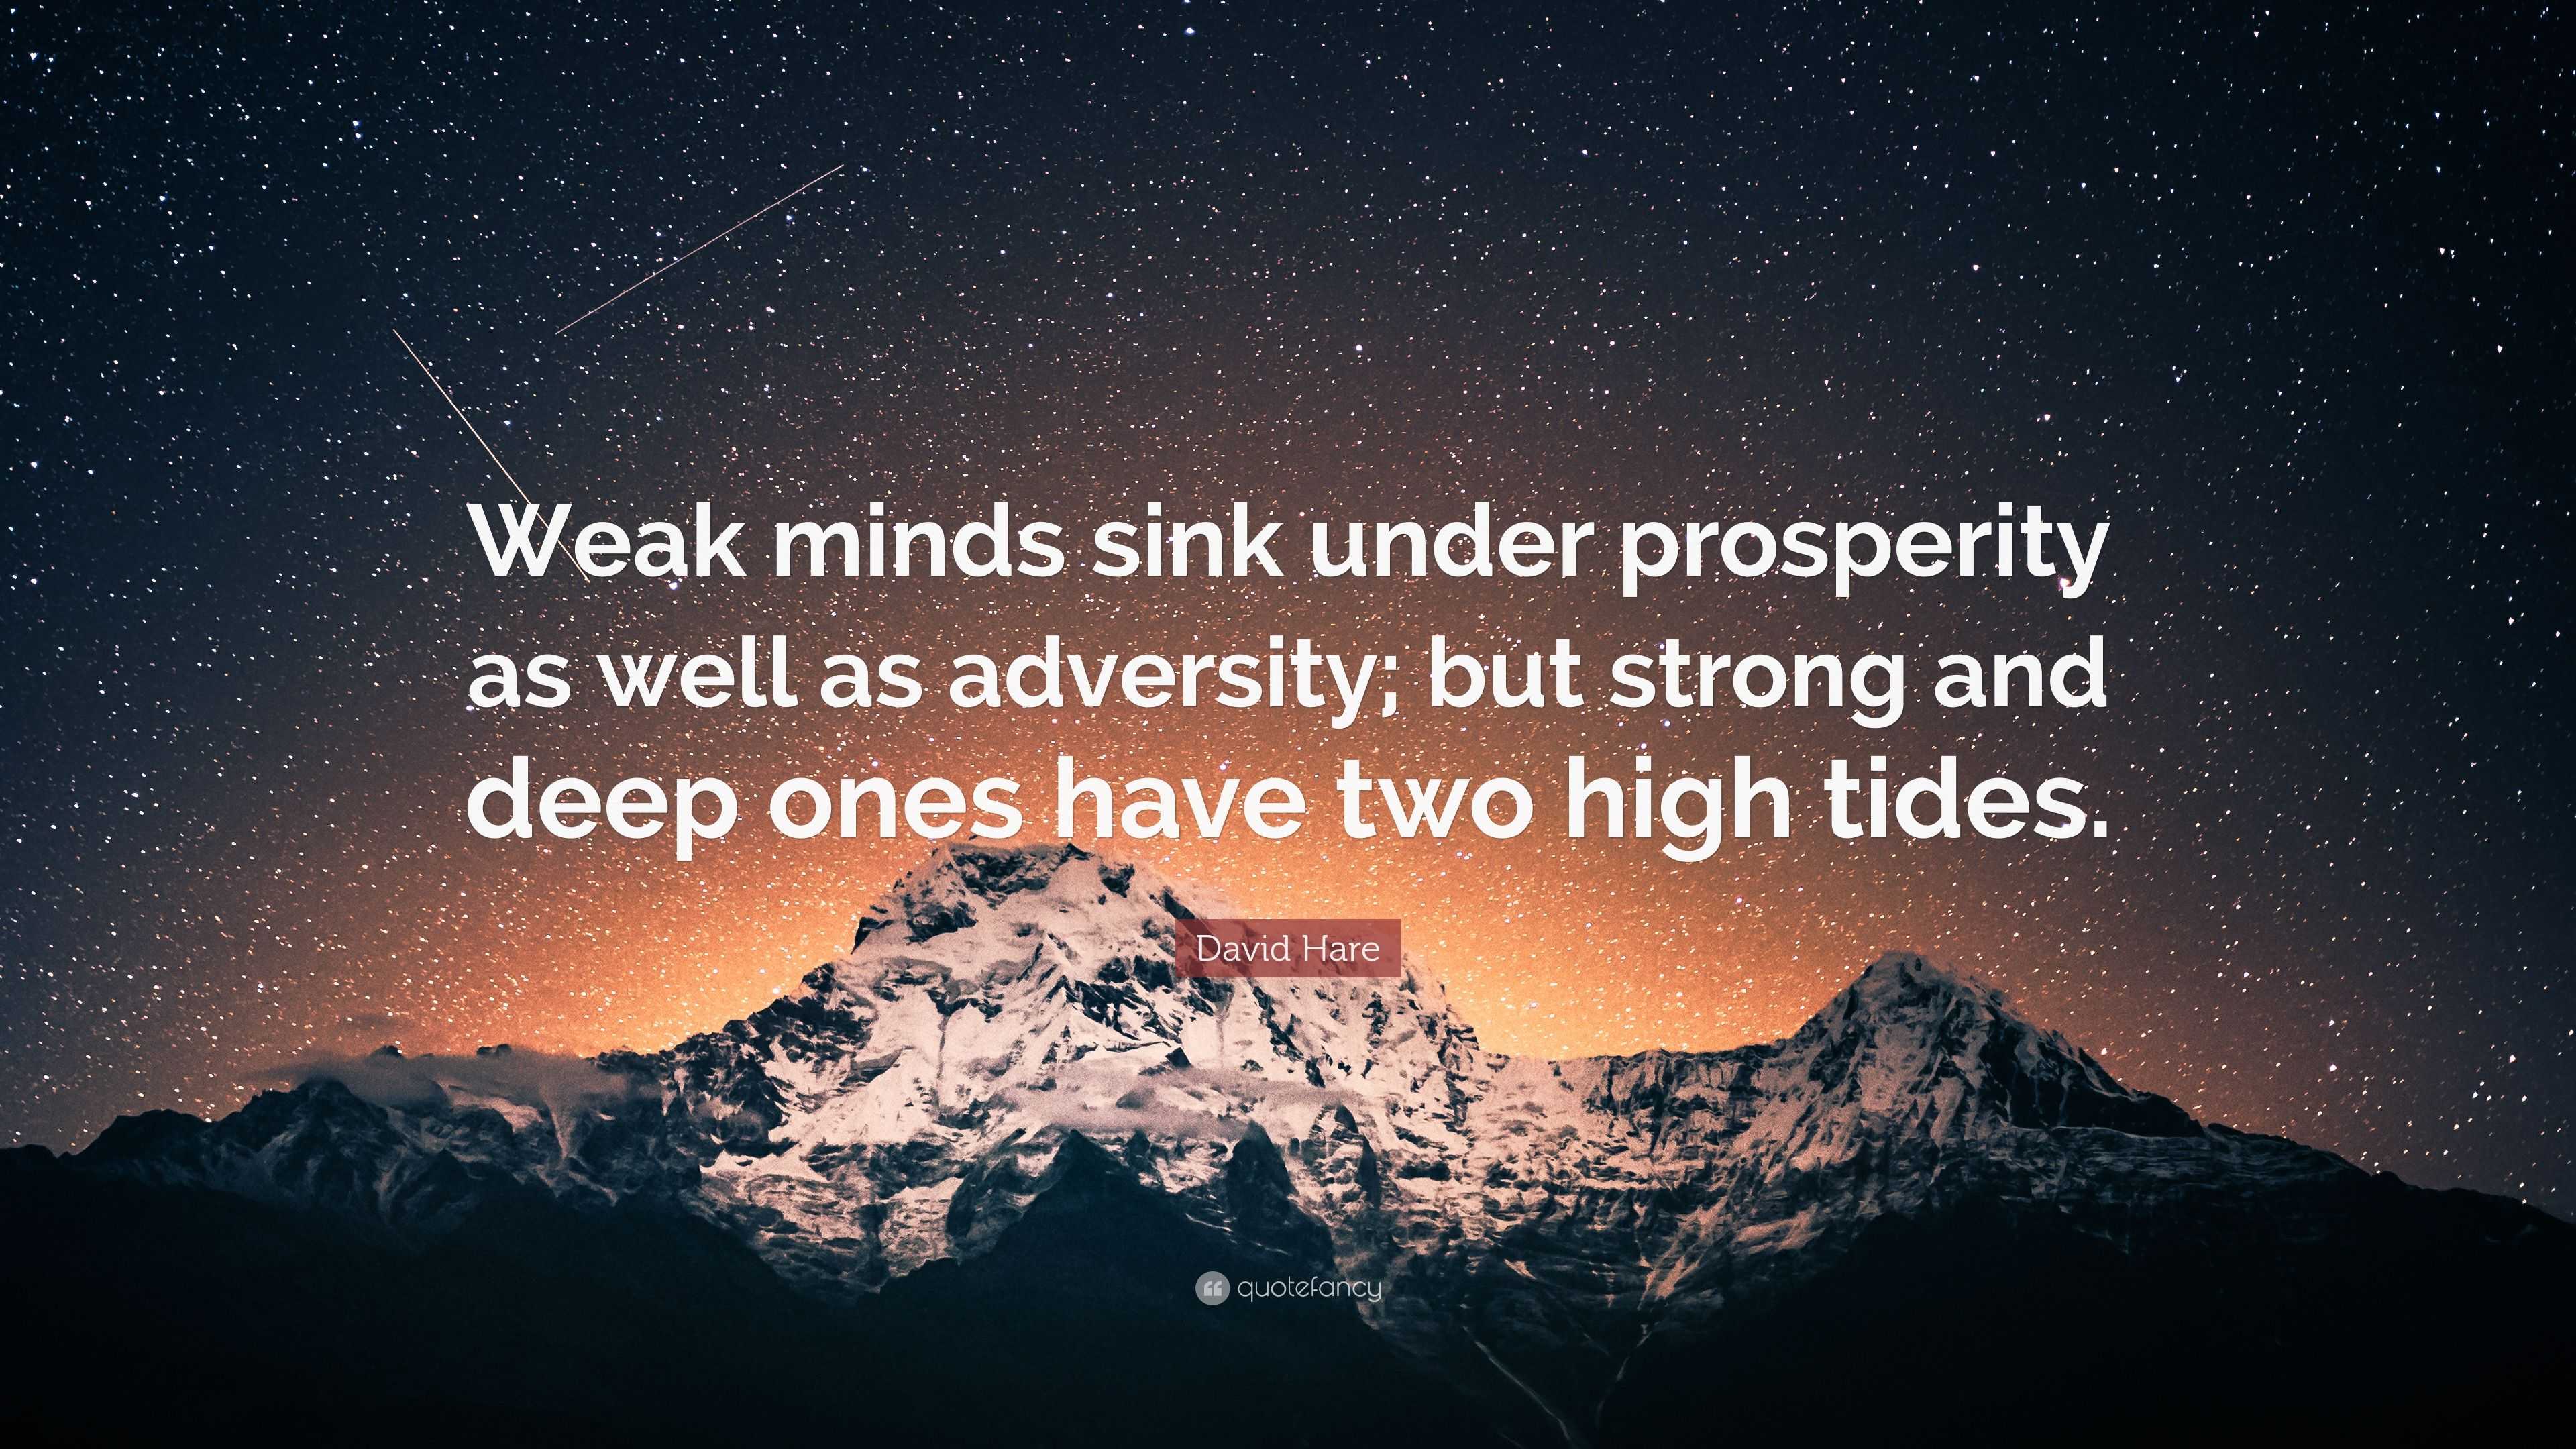 David Hare Quote: “Weak minds sink under prosperity as well as adversity;  but strong and deep